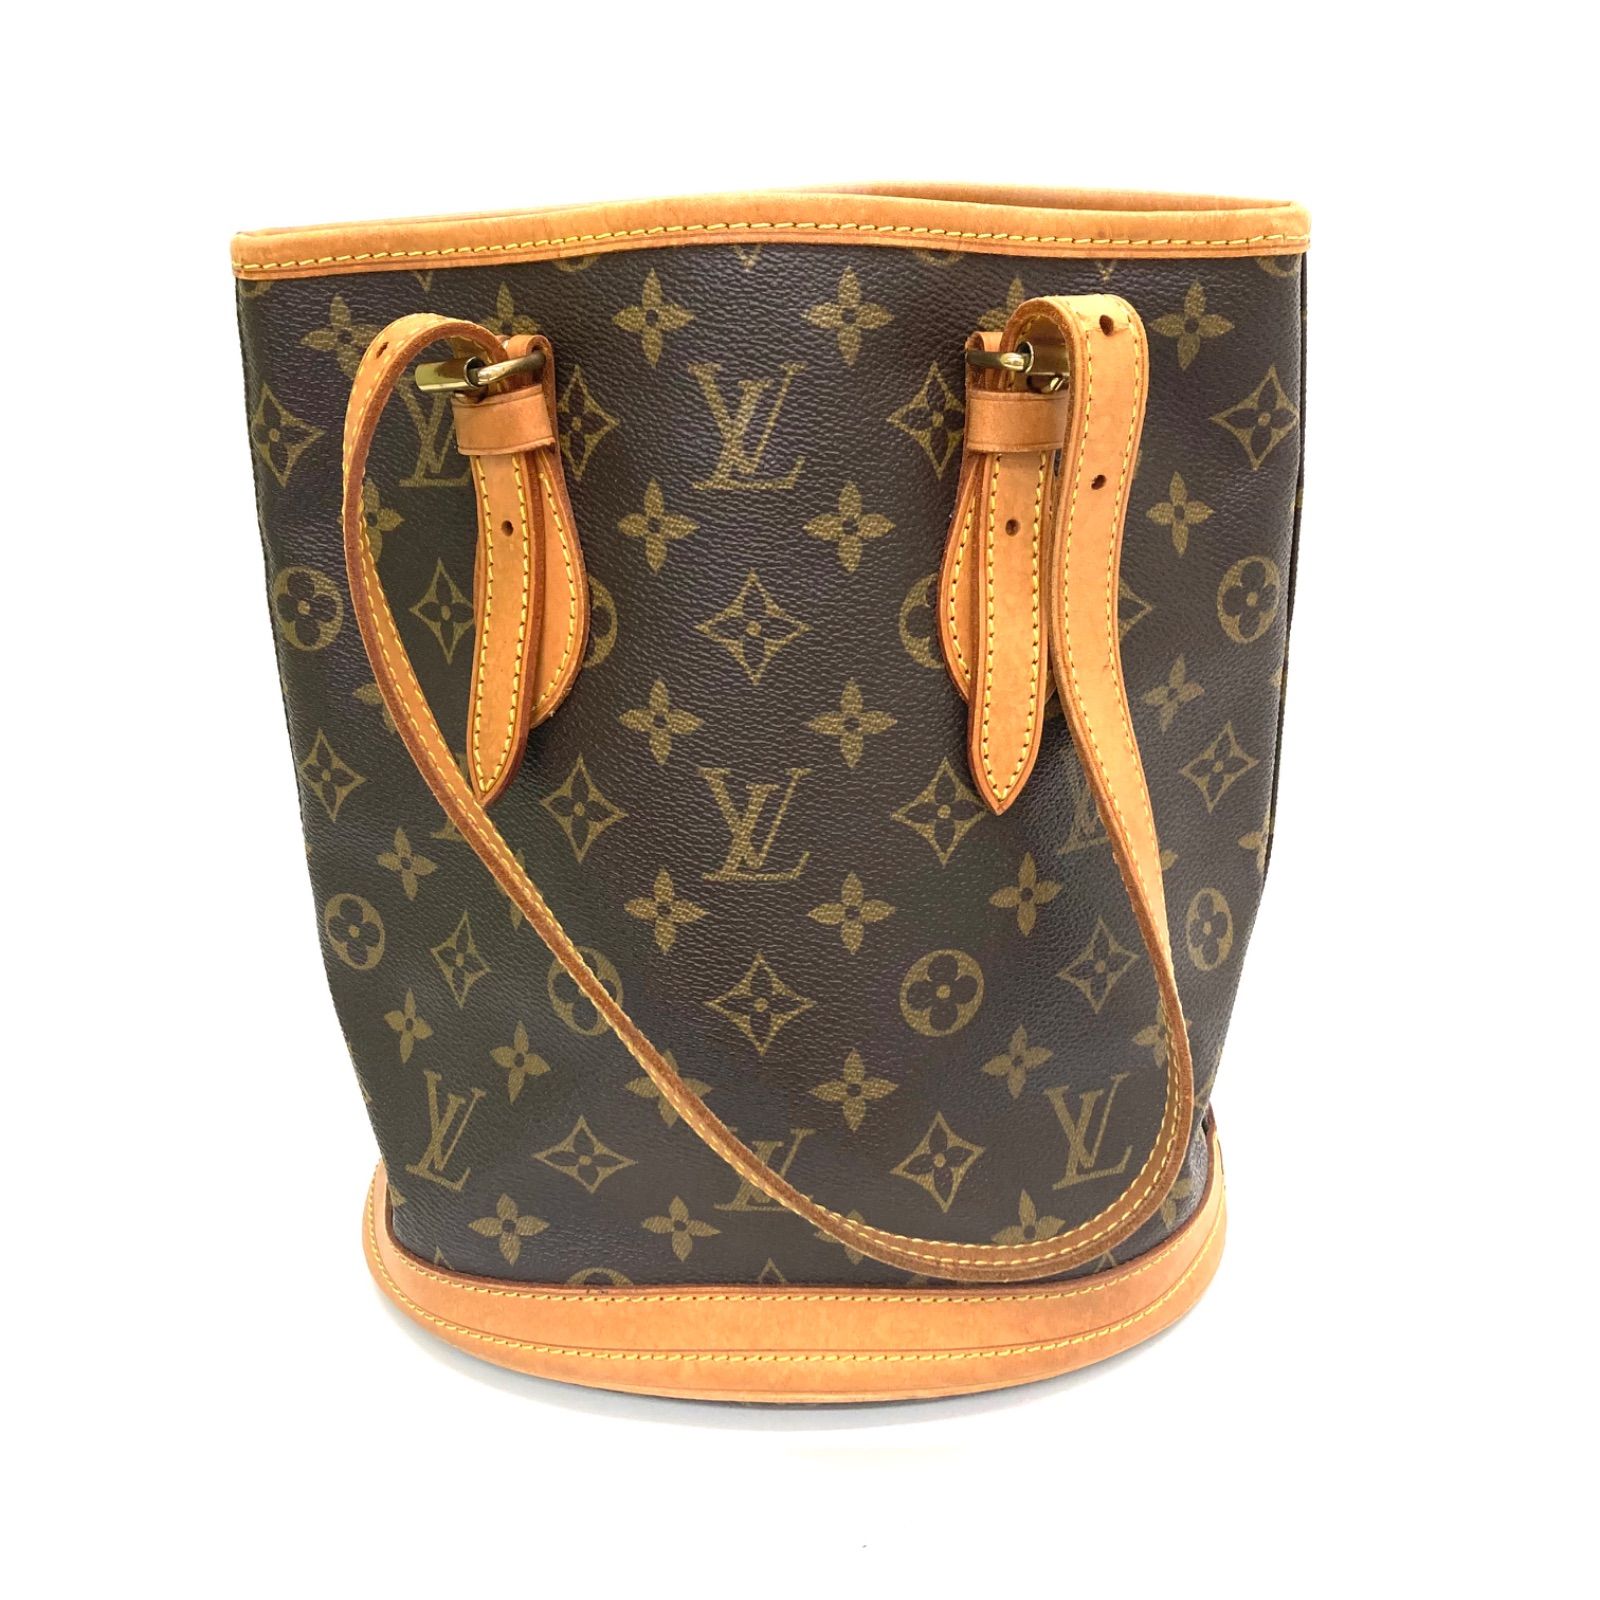 ◇LOUIS VUITTON◇ルイヴィトン モノグラム プチバケット PM 